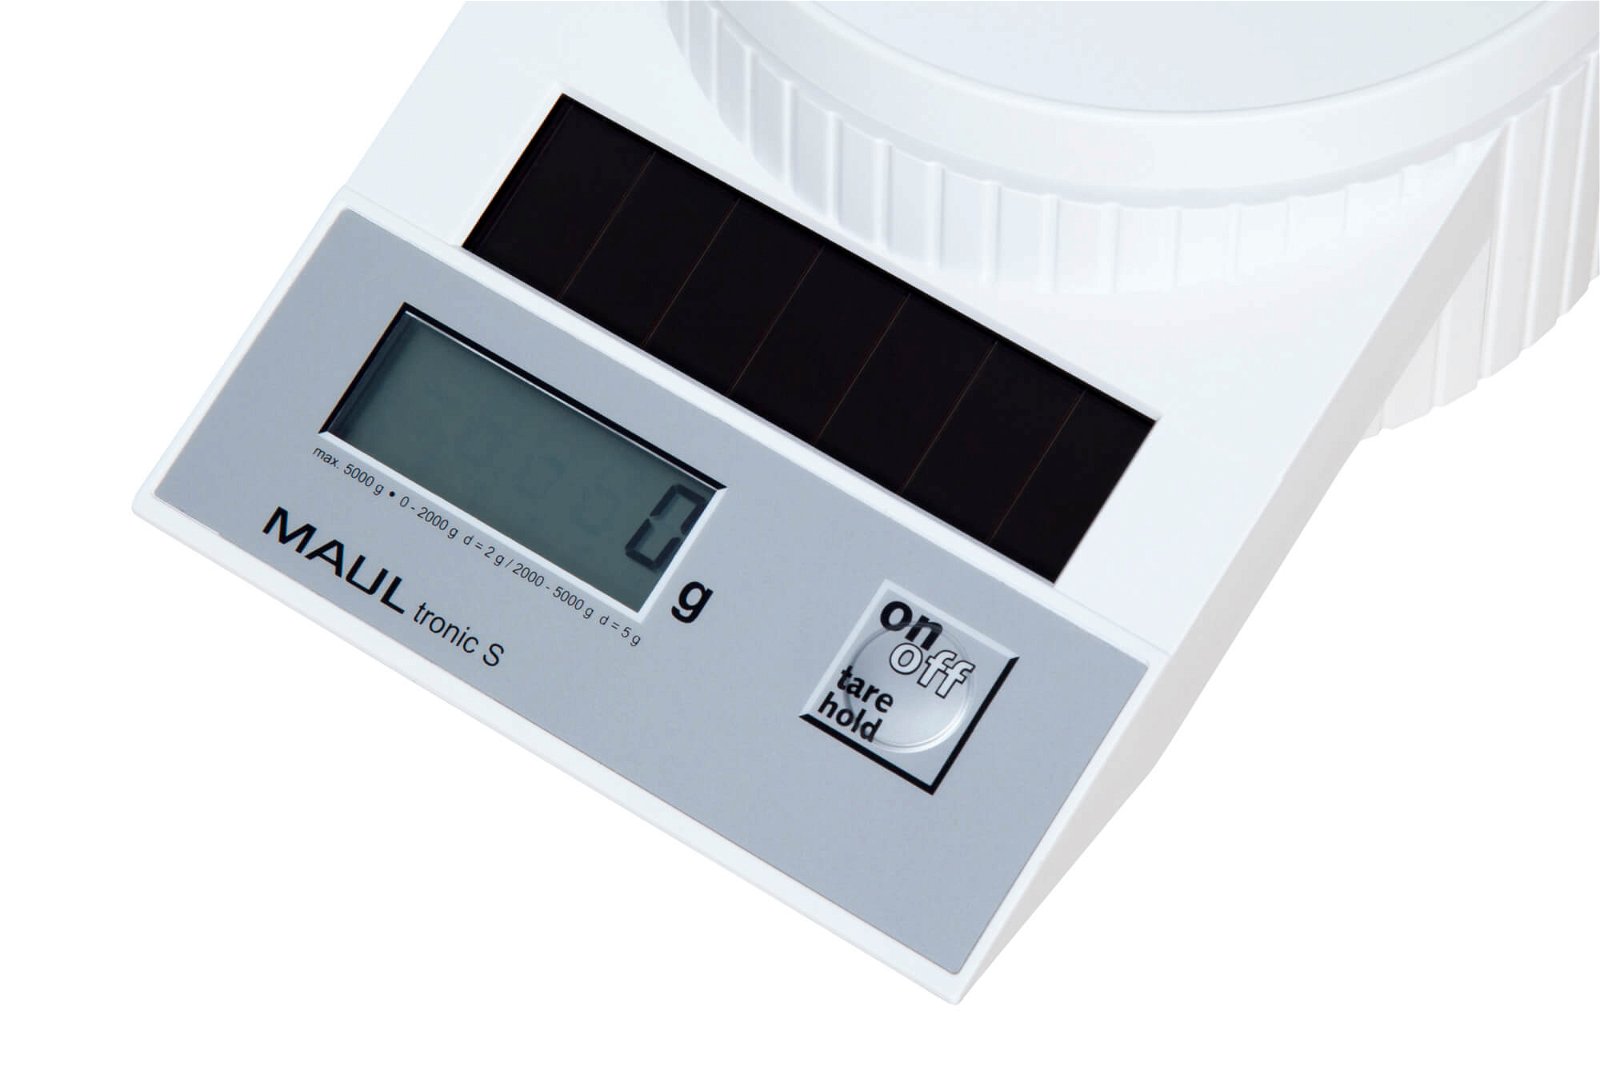 Solar-Briefwaage MAULtronic S, 5000 g, weiß